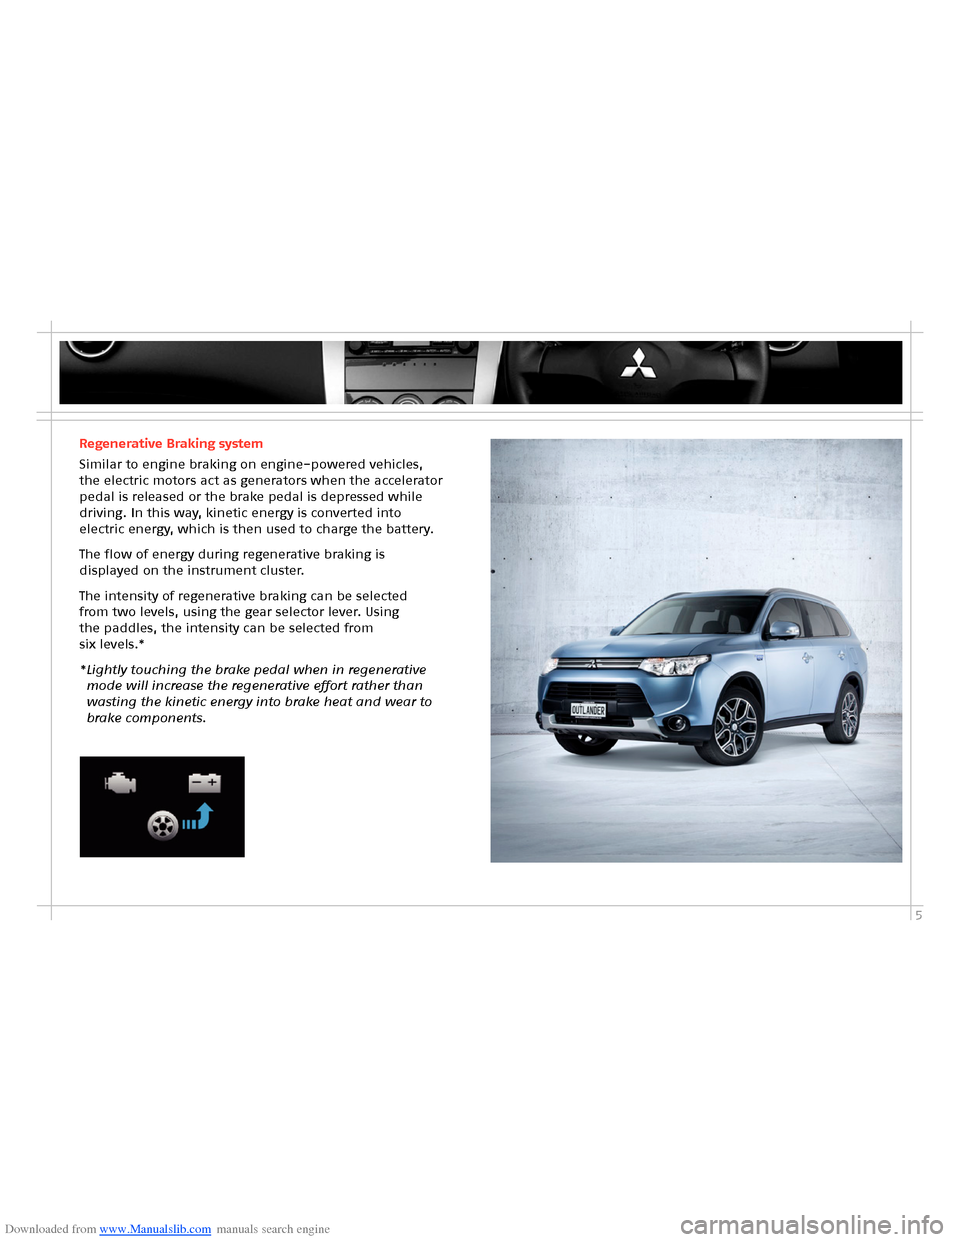 MITSUBISHI OUTLANDER HYBRID 2014 3.G Owners Handbook Downloaded from www.Manualslib.com manuals search engine 55
Regenerative Braking system
Similar to engine braking on engine-powered vehicles, the electric motors act as generators when the accelerator